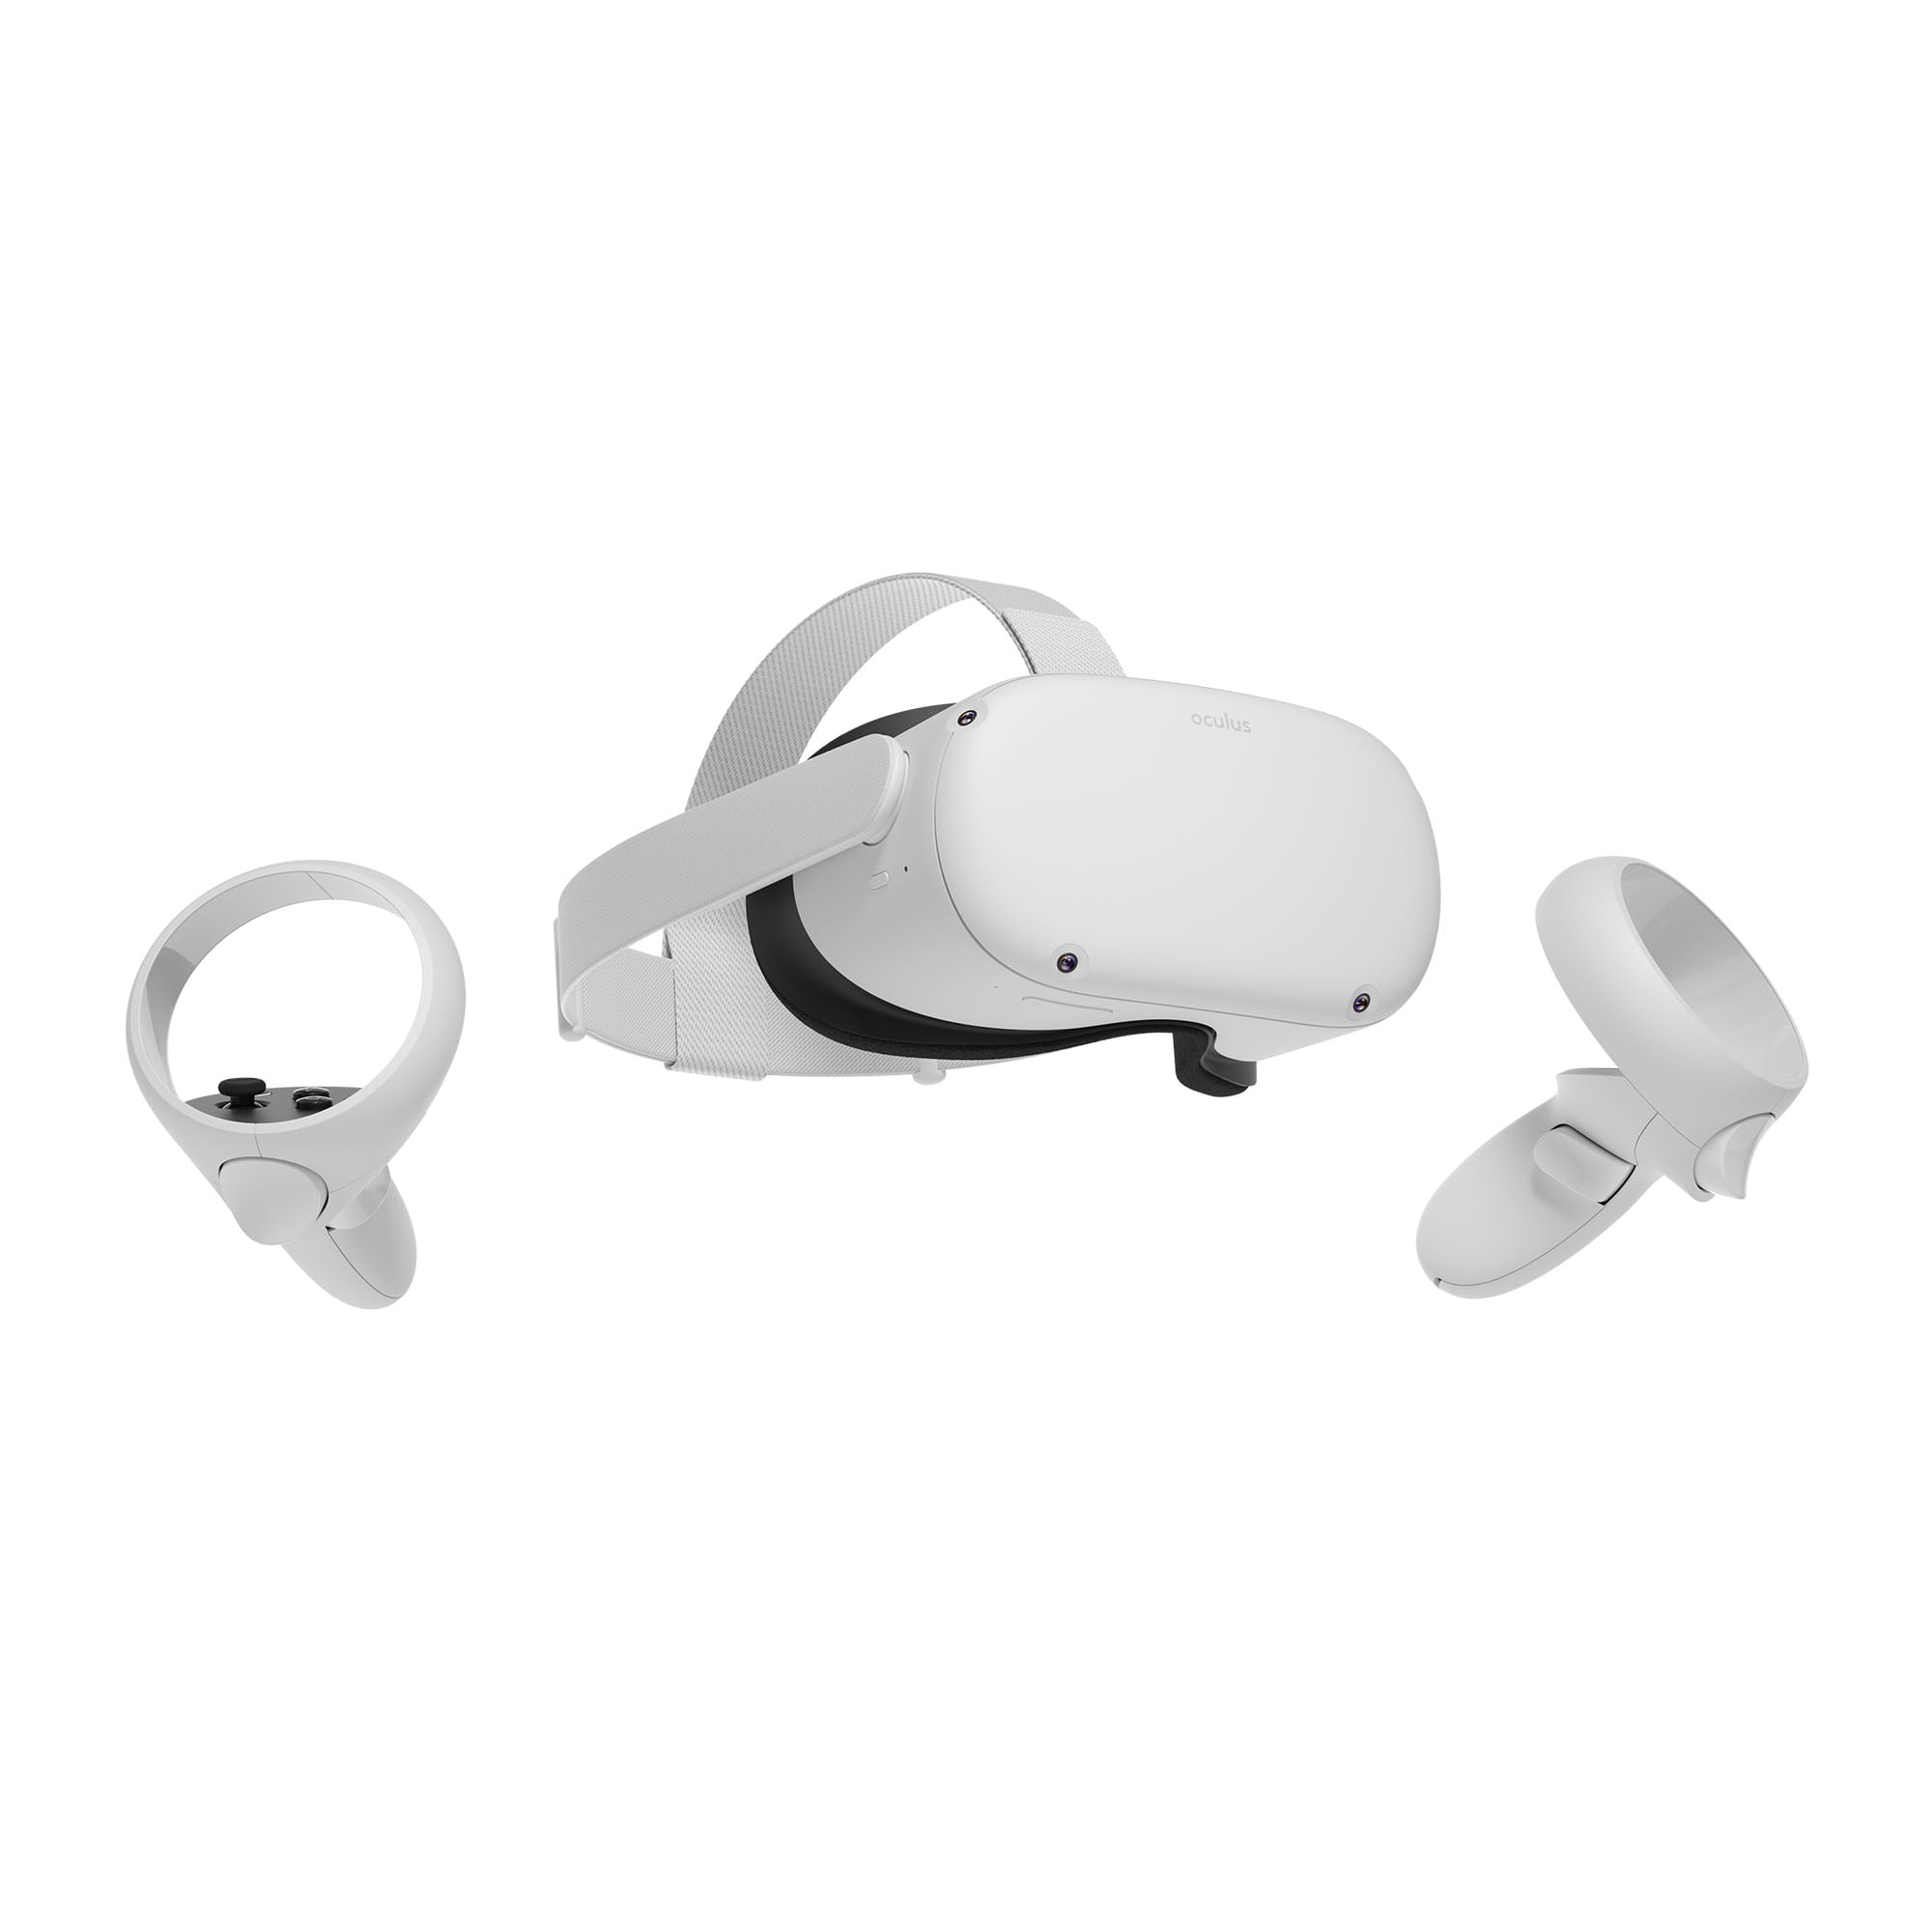 Oculus Quest 2 $300 for 128GB, $400 for 256GB at Walmart, shipped.